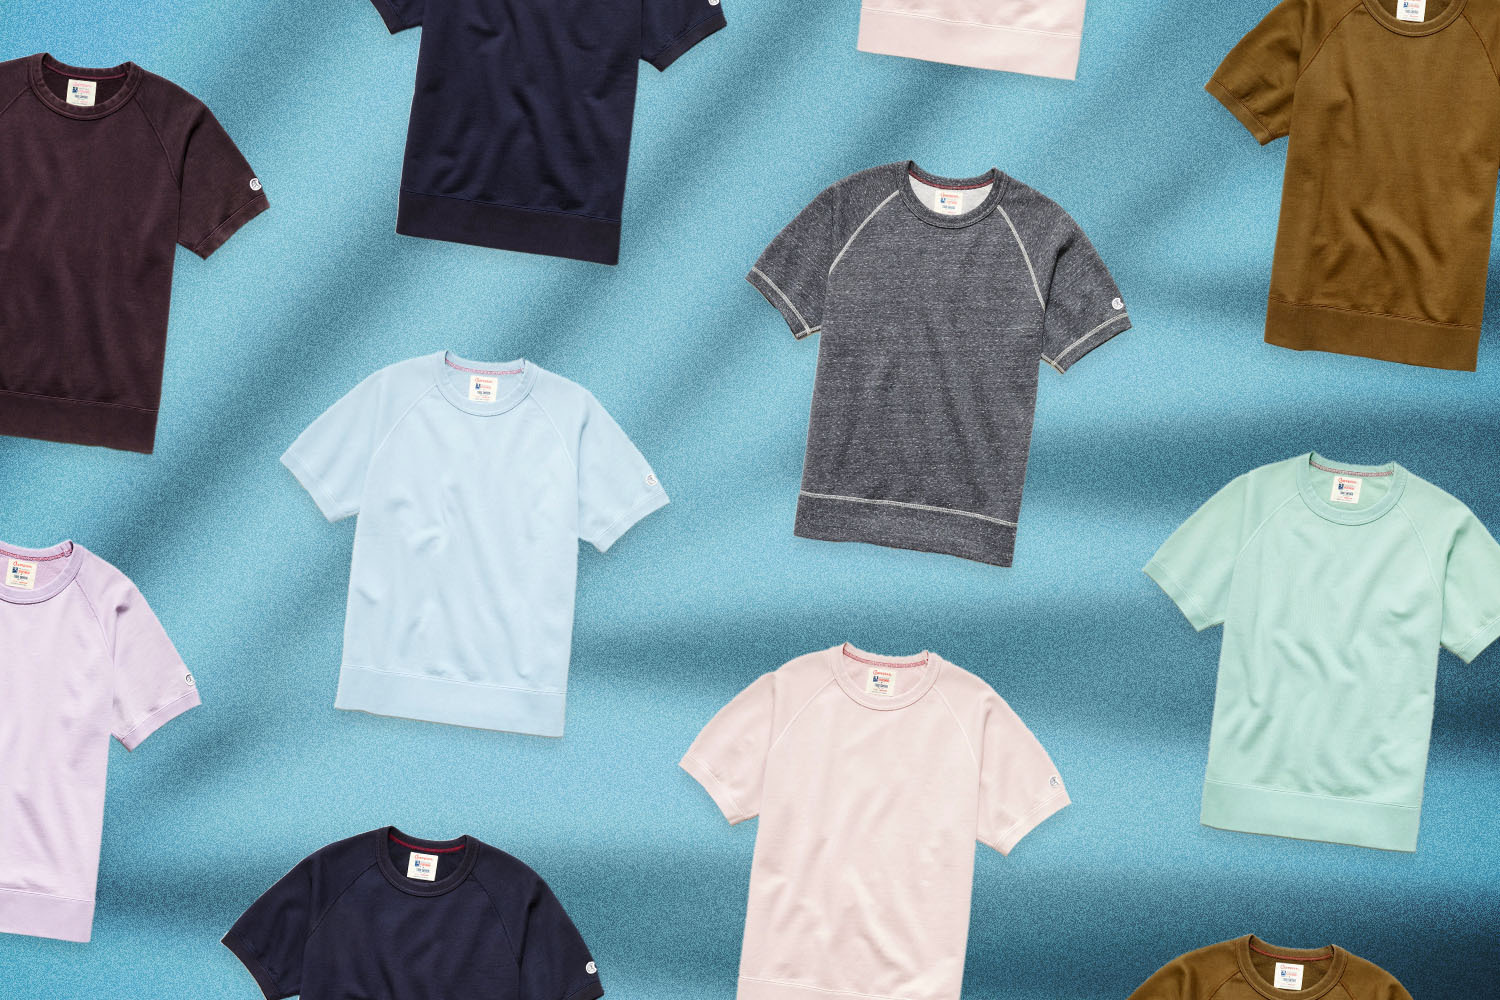 How to Wear a Short-Sleeve Sweatshirt, A Must-Have for 2021 - InsideHook